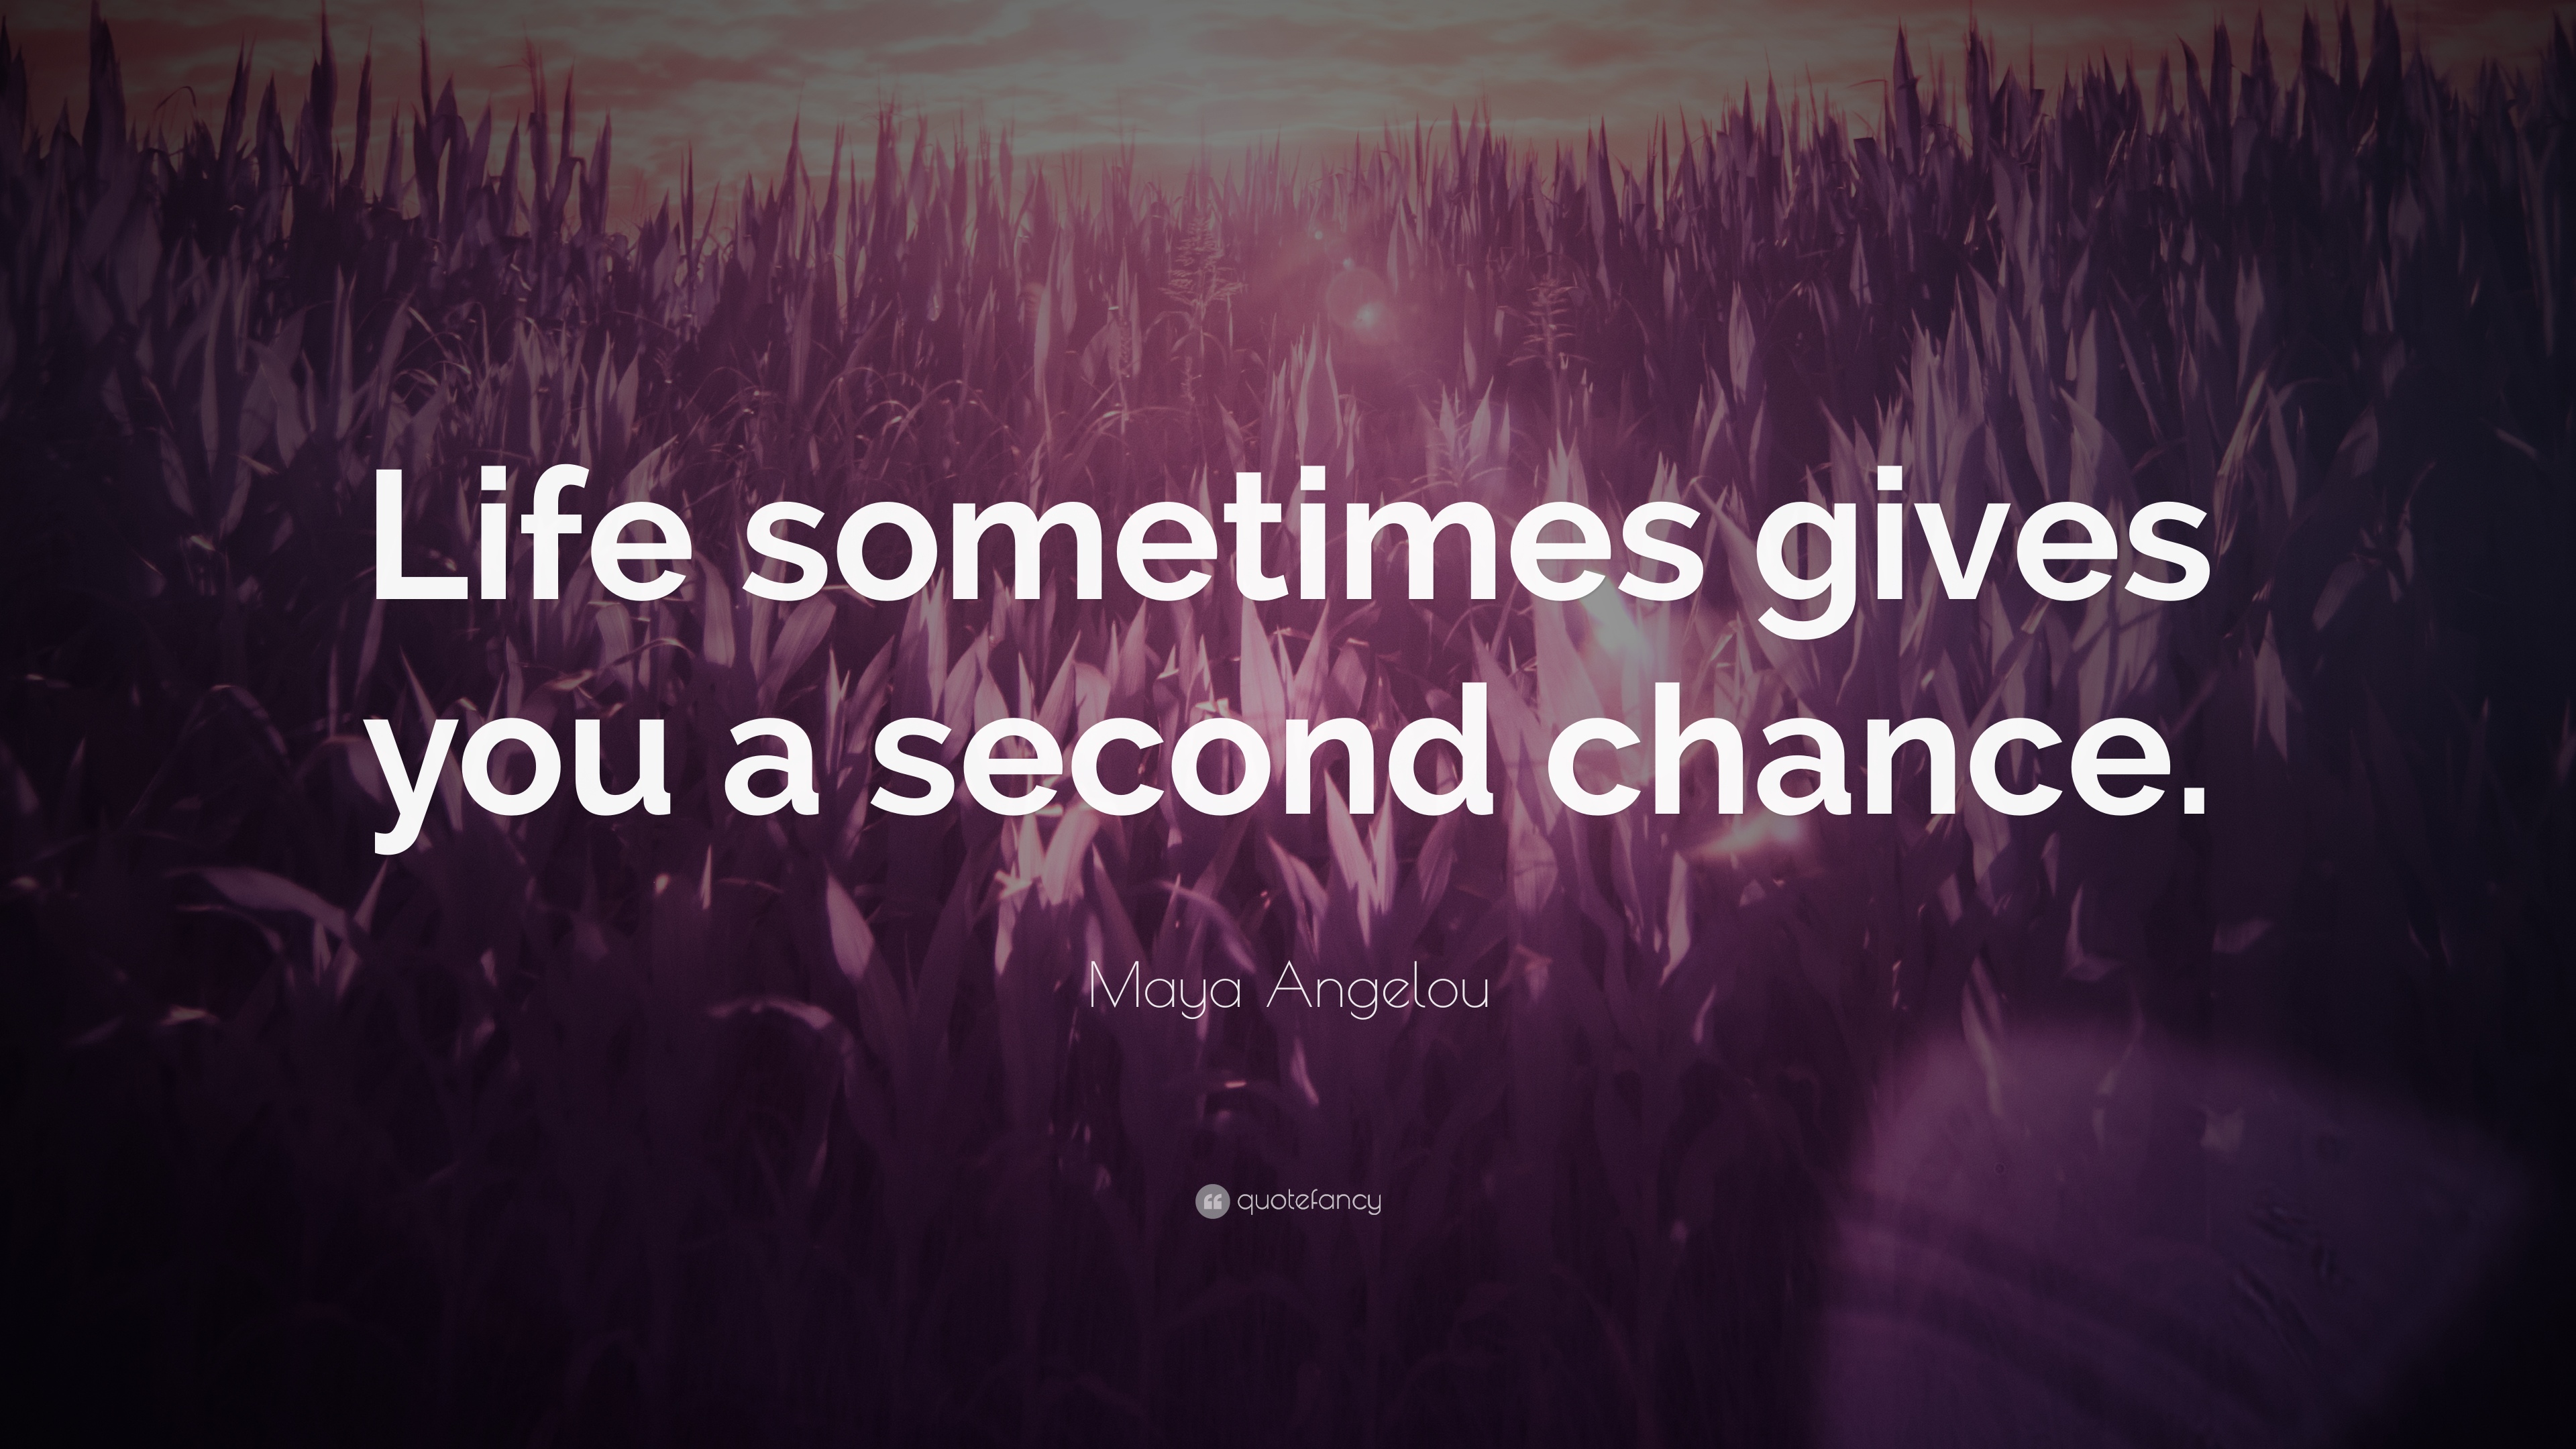 Maya Angelou Quote: “Life sometimes gives you a second